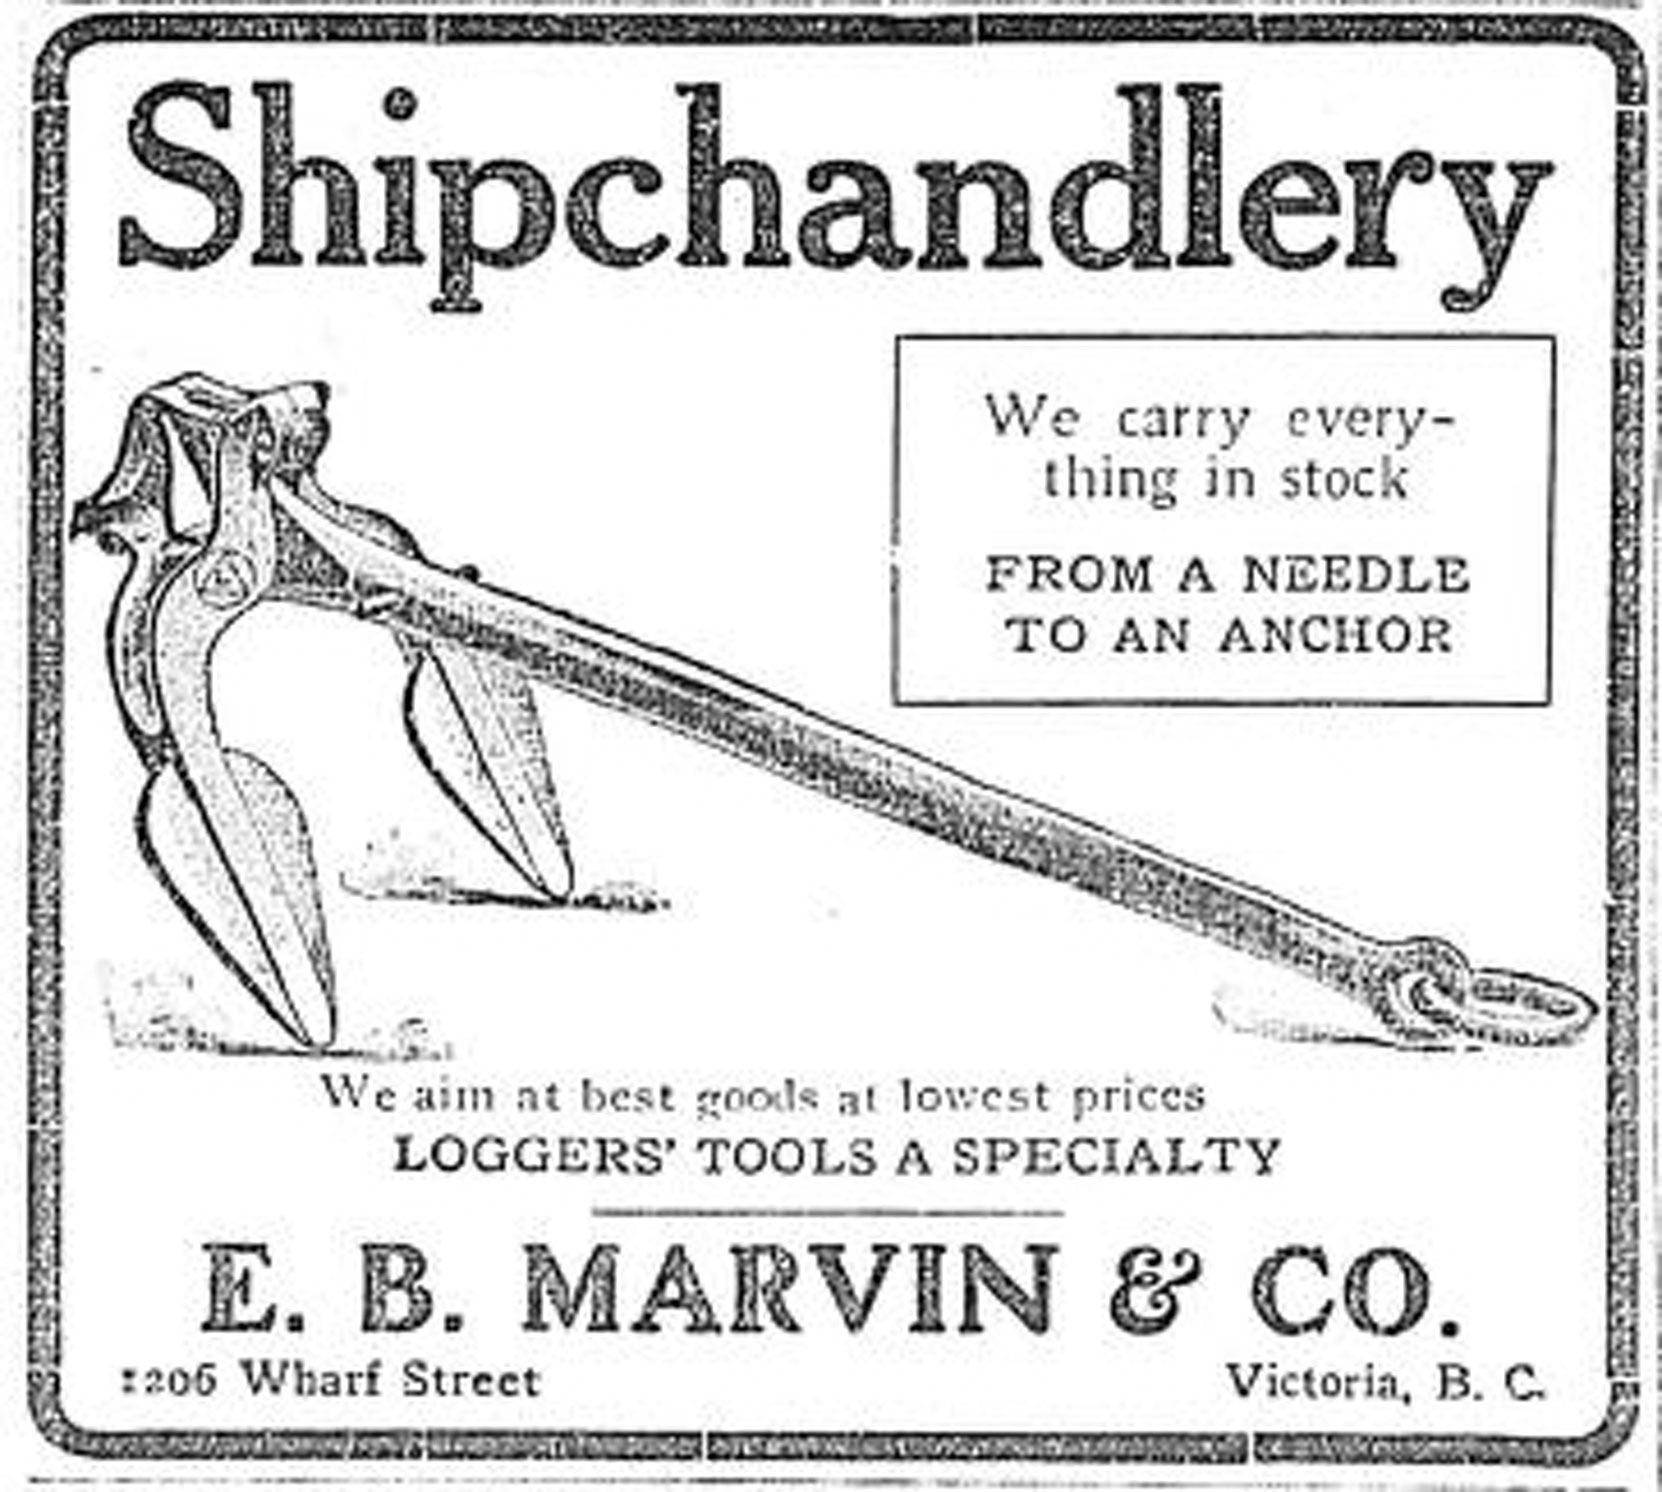 1909 advertisement for E.B. Marvin & Co., Ship Chandlers, 1206 Wharf Street. (Victoria Online Sightseeing Tours collection)